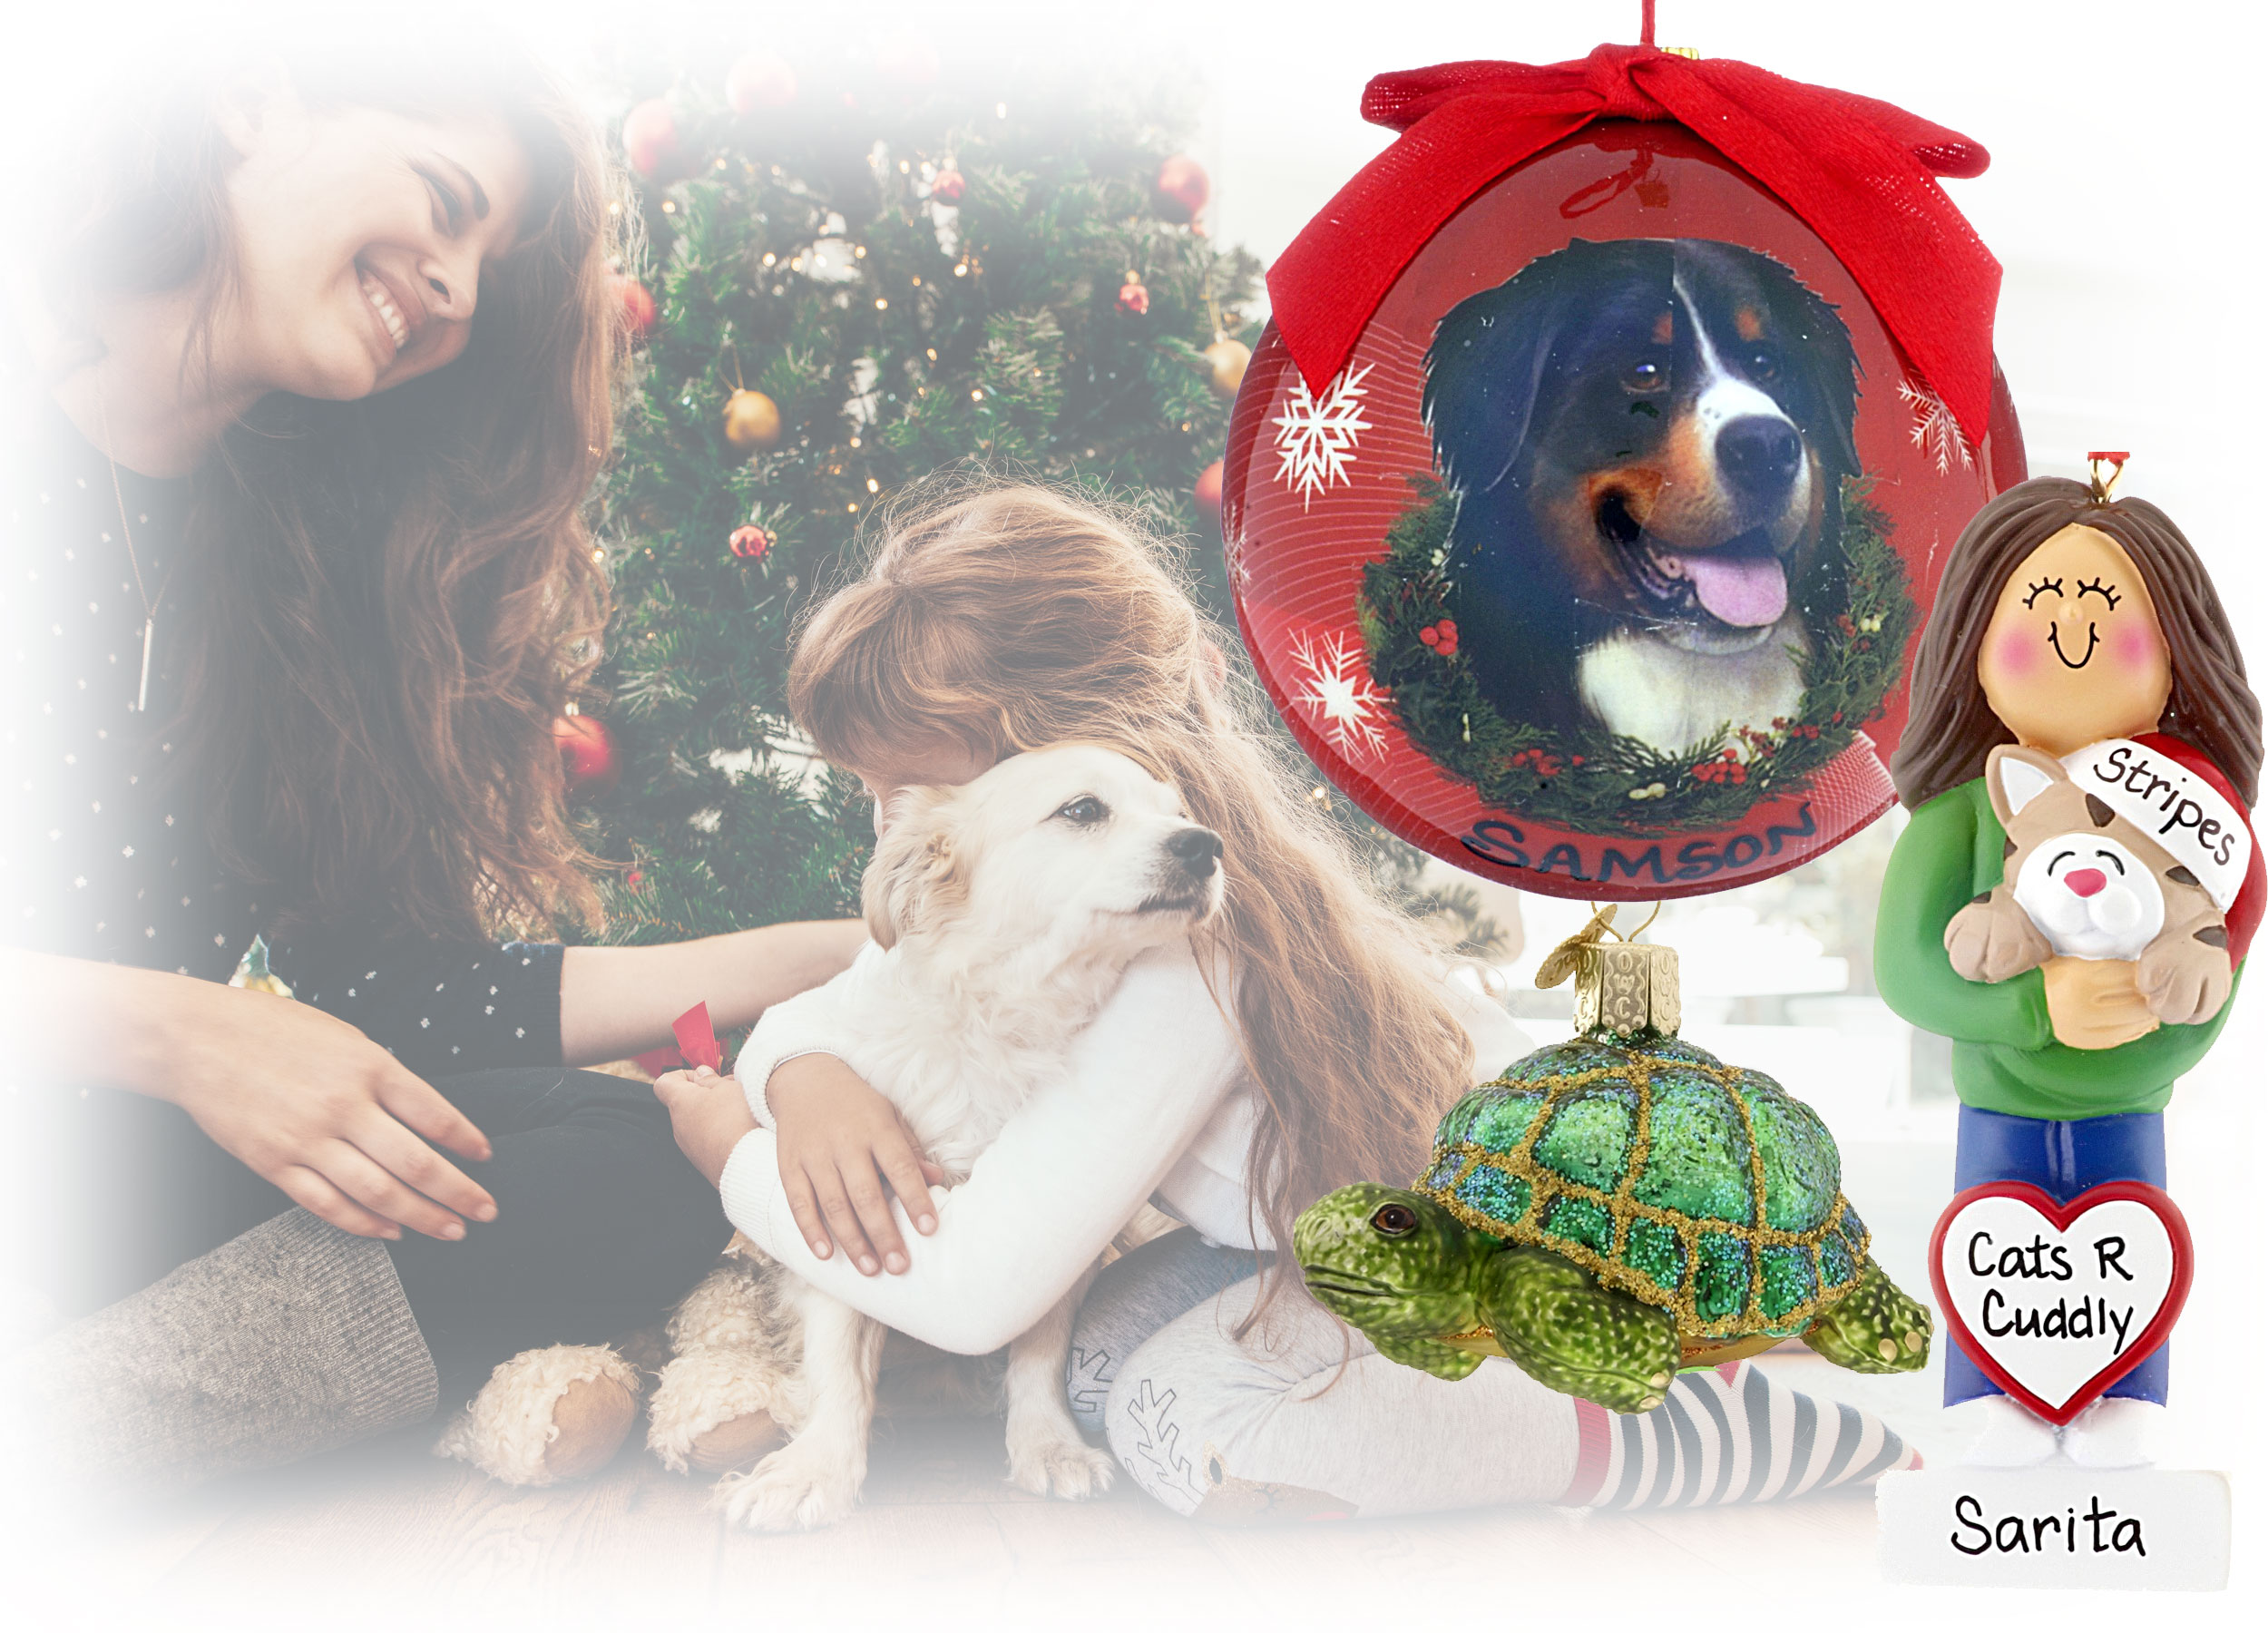 Celebrate Christmas with pets with personalized ornaments this year. | OrnamentShop.com